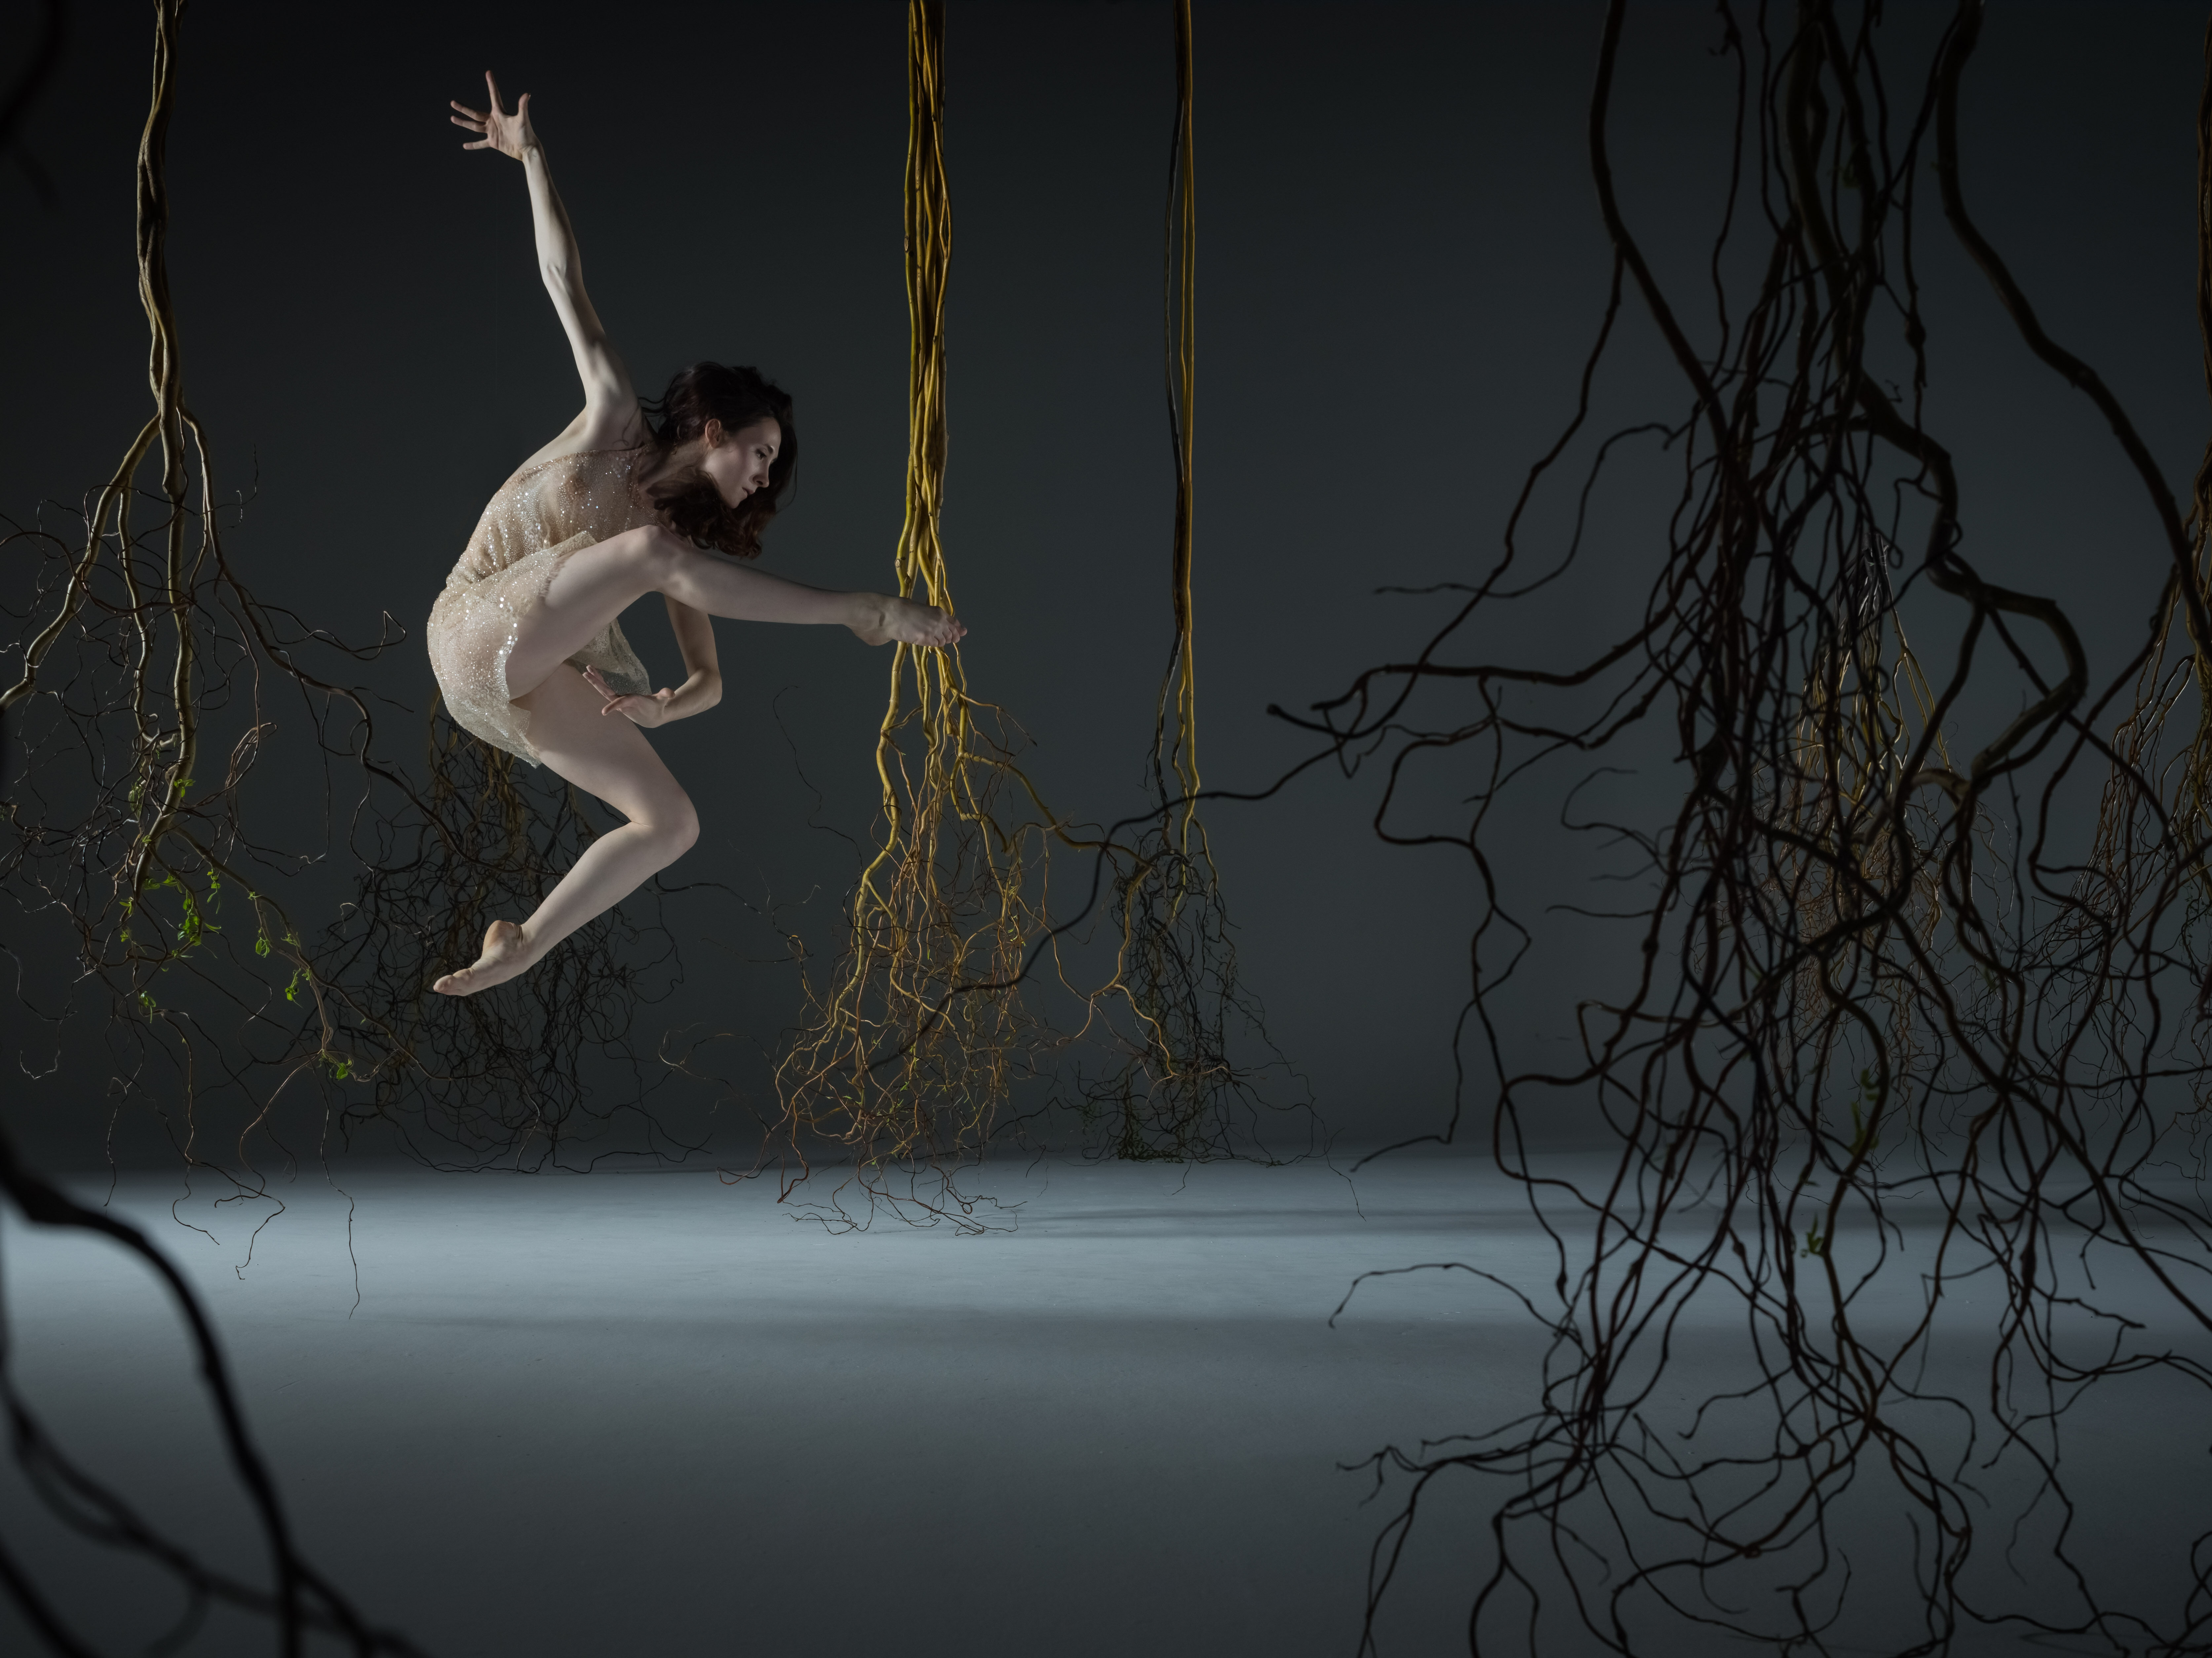 Alonzo King LINES Ballet dancer Maya Harr jumping amidst branches against a gray background